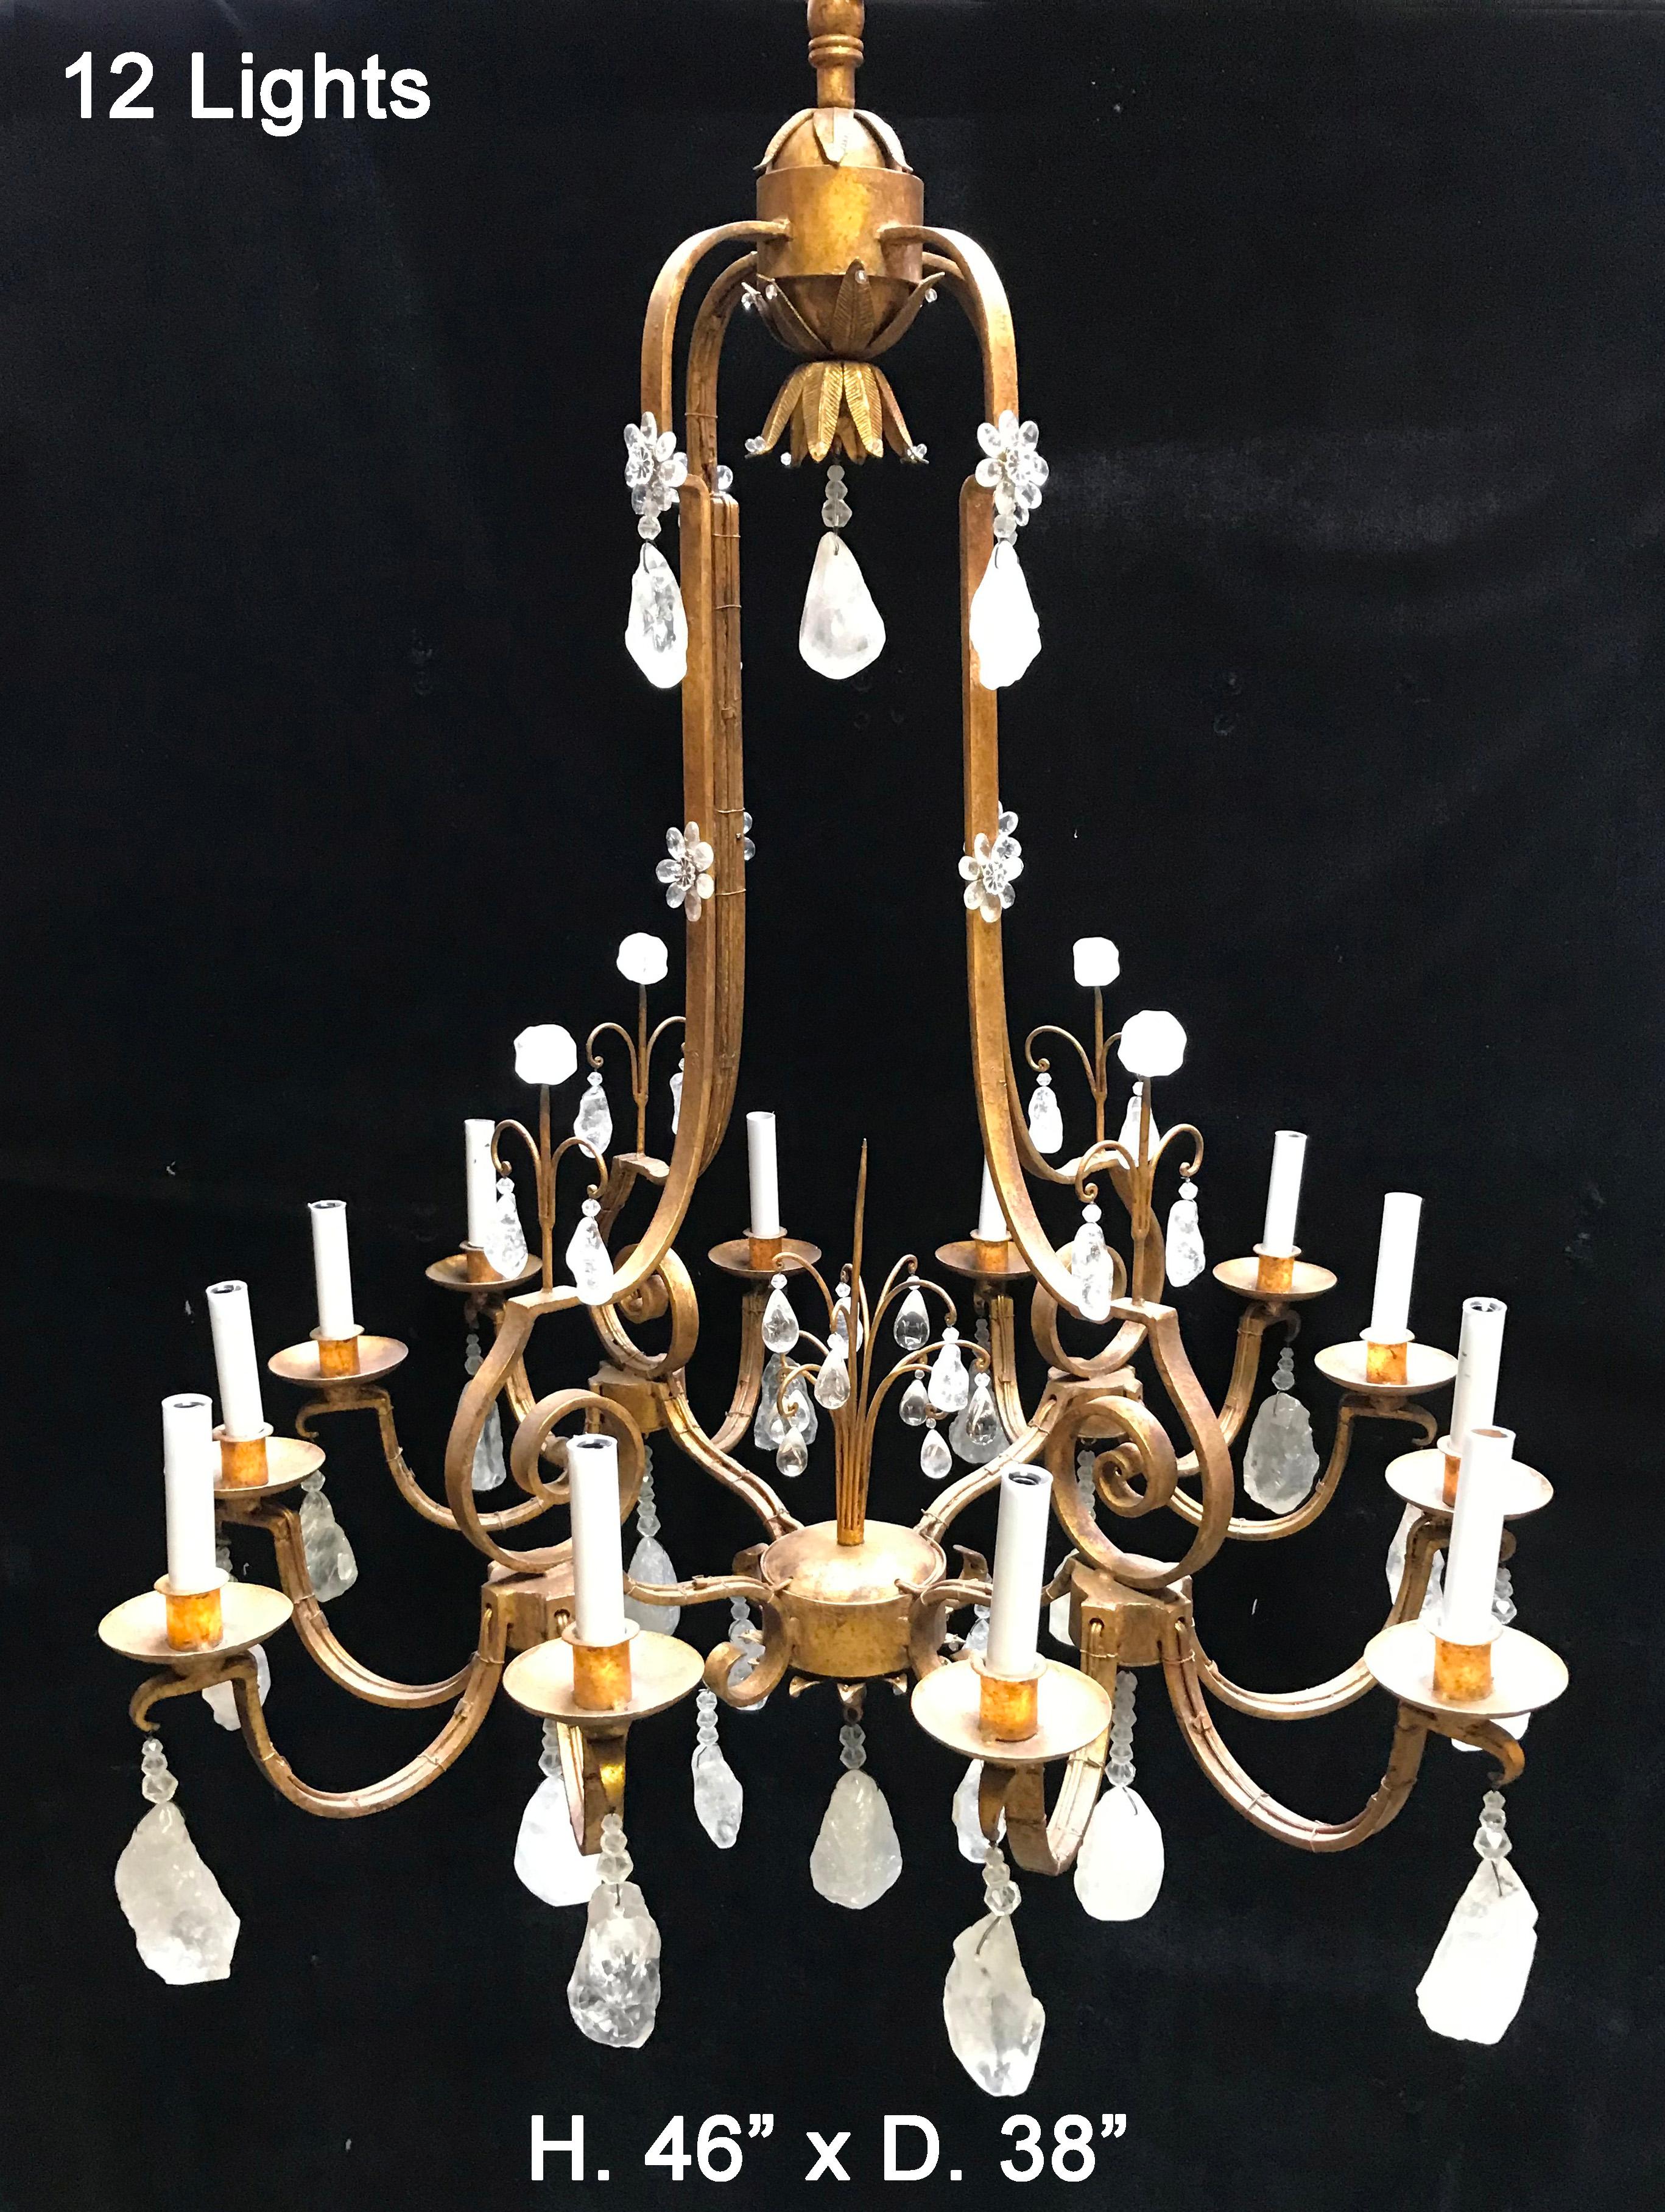 A Venetian style rock crystal nugget and hand forged wrought iron twelve light chandelier with antique gold finish.
Electrified. 

The rock crystal nuggets is a unique and rare shape to have on the chandelier.

Handmade bees wax candle sleeves